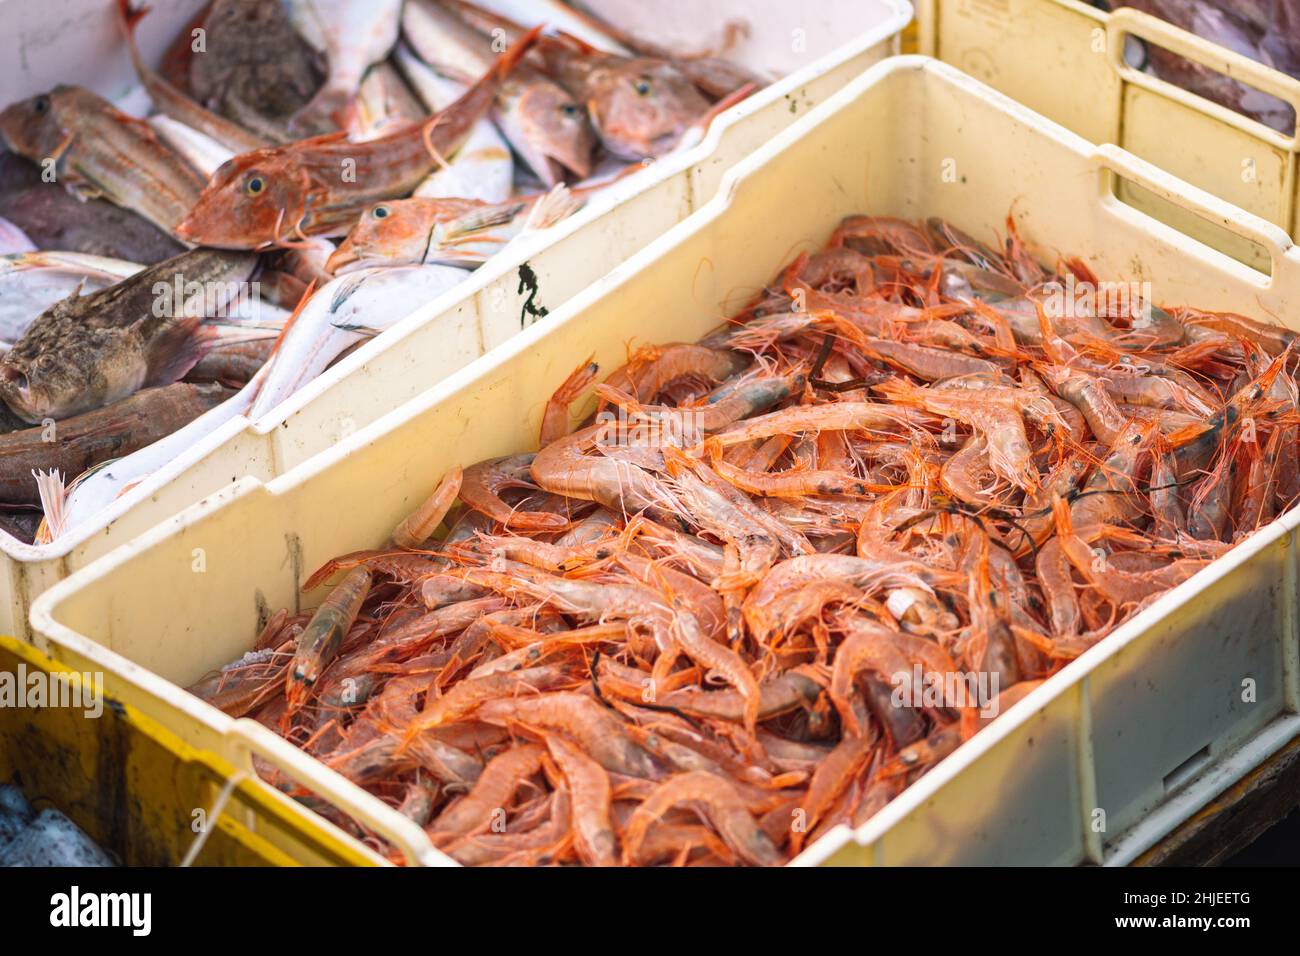 Freshly just caught shrimps and other fish in plastic crates on a fishing wooden boat ready to be sold at the fish market Stock Photo